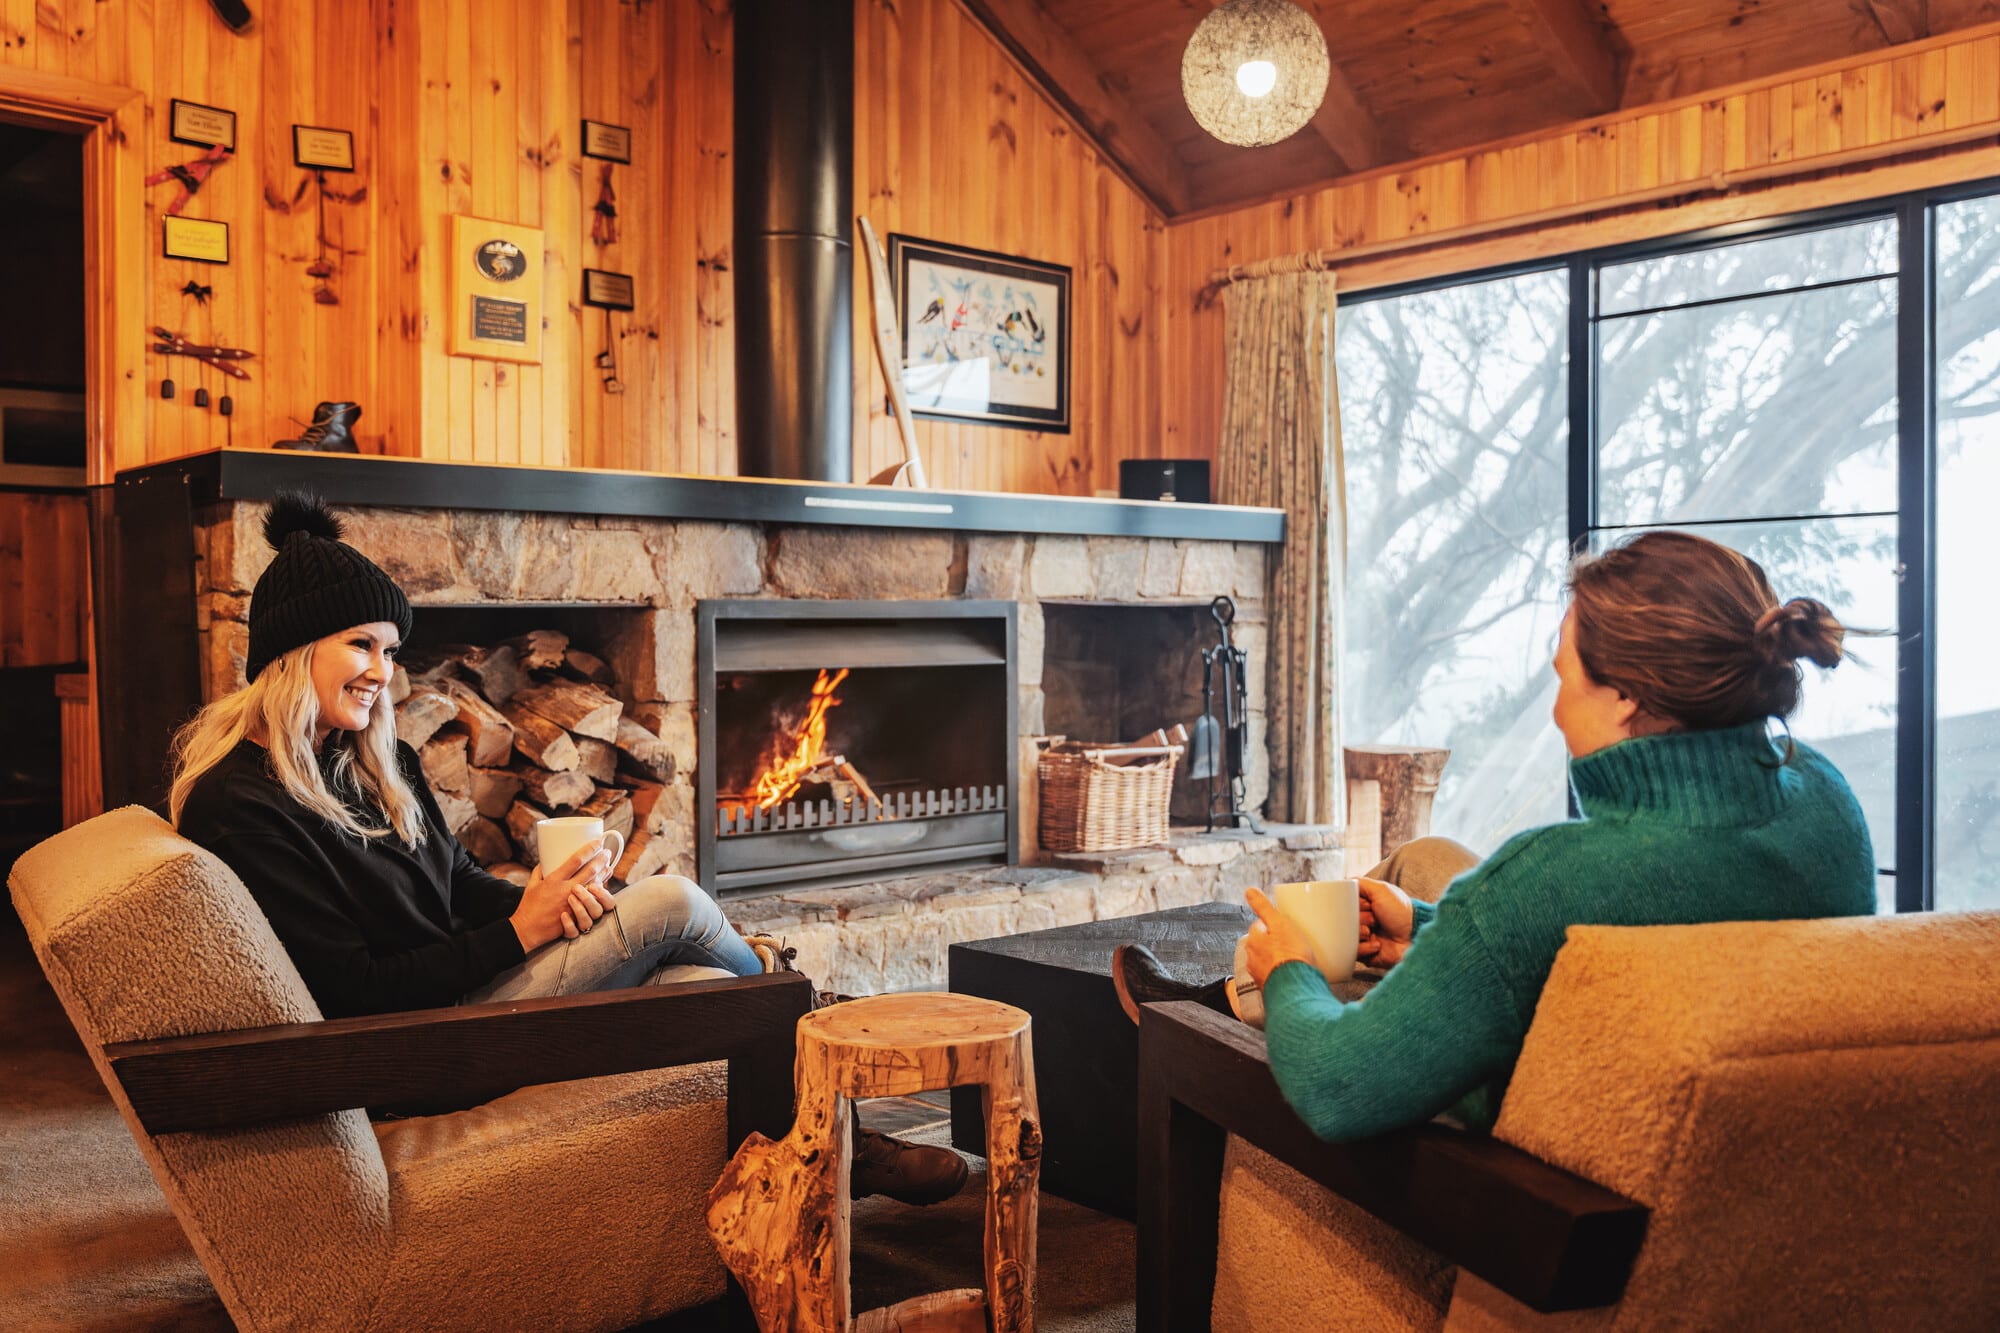 Two women sitting in lounge chairs by a log fire in a wooden ski club, drinking coffee from white mugs and smiling as they chat.